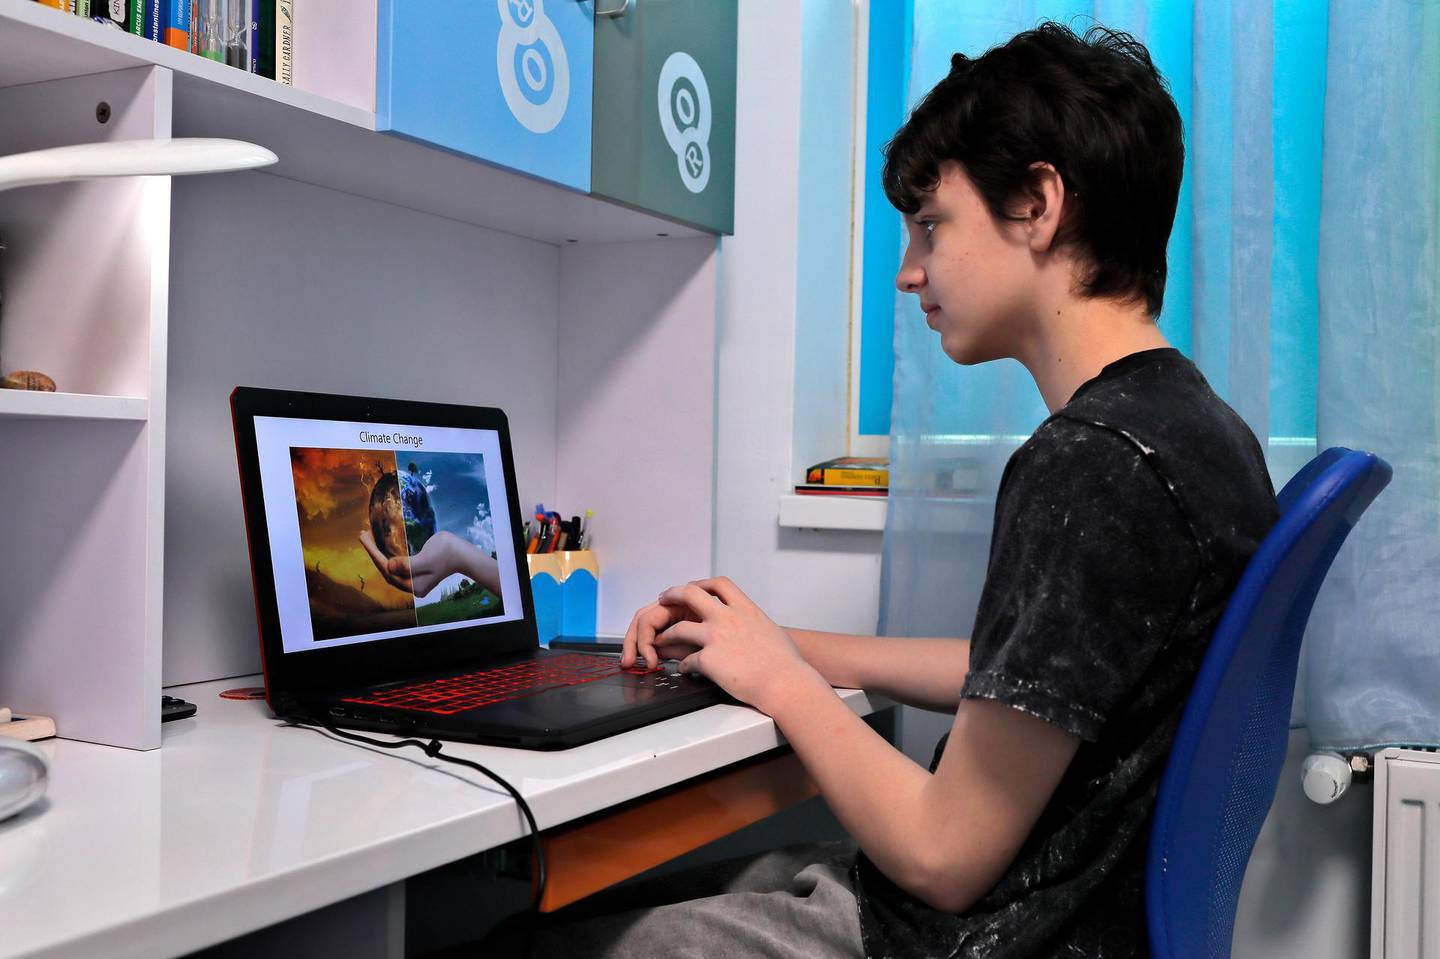 epa08375918 Romanian school student Mihai, 15, makes the final adjustments on his slideshow ahead of the Earth Day 50 global online event, in his family flat in Bucharest, Romania, 21 April 2020. Mihai will join the online Earth Day 'digital storm' by sharing a short story and a slideshow he specially made for this occasion. Earth Day, first time celebrated in 1970, is an annual event celebrated around the world on 22 April to demonstrate support for environmental protection, and now is globally coordinated by the Earth Day Network (EDN), which is active in about 193 countries. This year, to mark 50 years of celebrating Earth Day, EDN supporters around the globe are asked to flood the digital landscape with global conversations, calls to action, performances, video teach-ins and more.  EPA/ROBERT GHEMENT